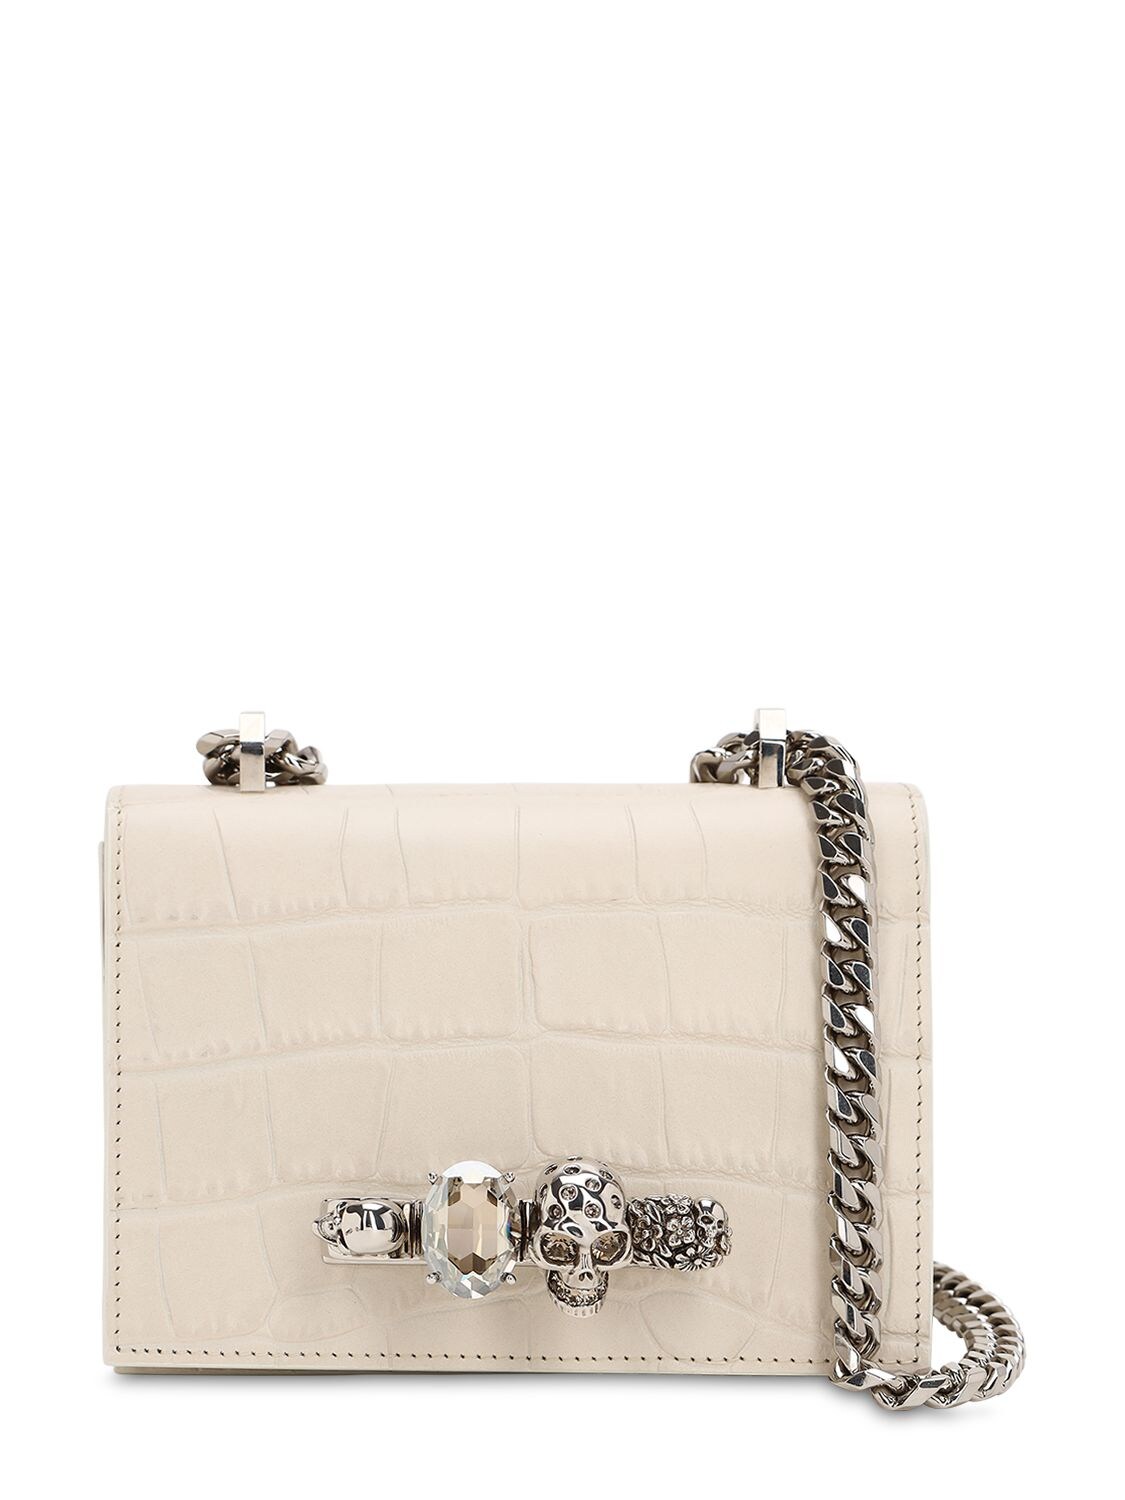 Alexander Mcqueen Small Croc Embossed Leather Satchel Bag In White